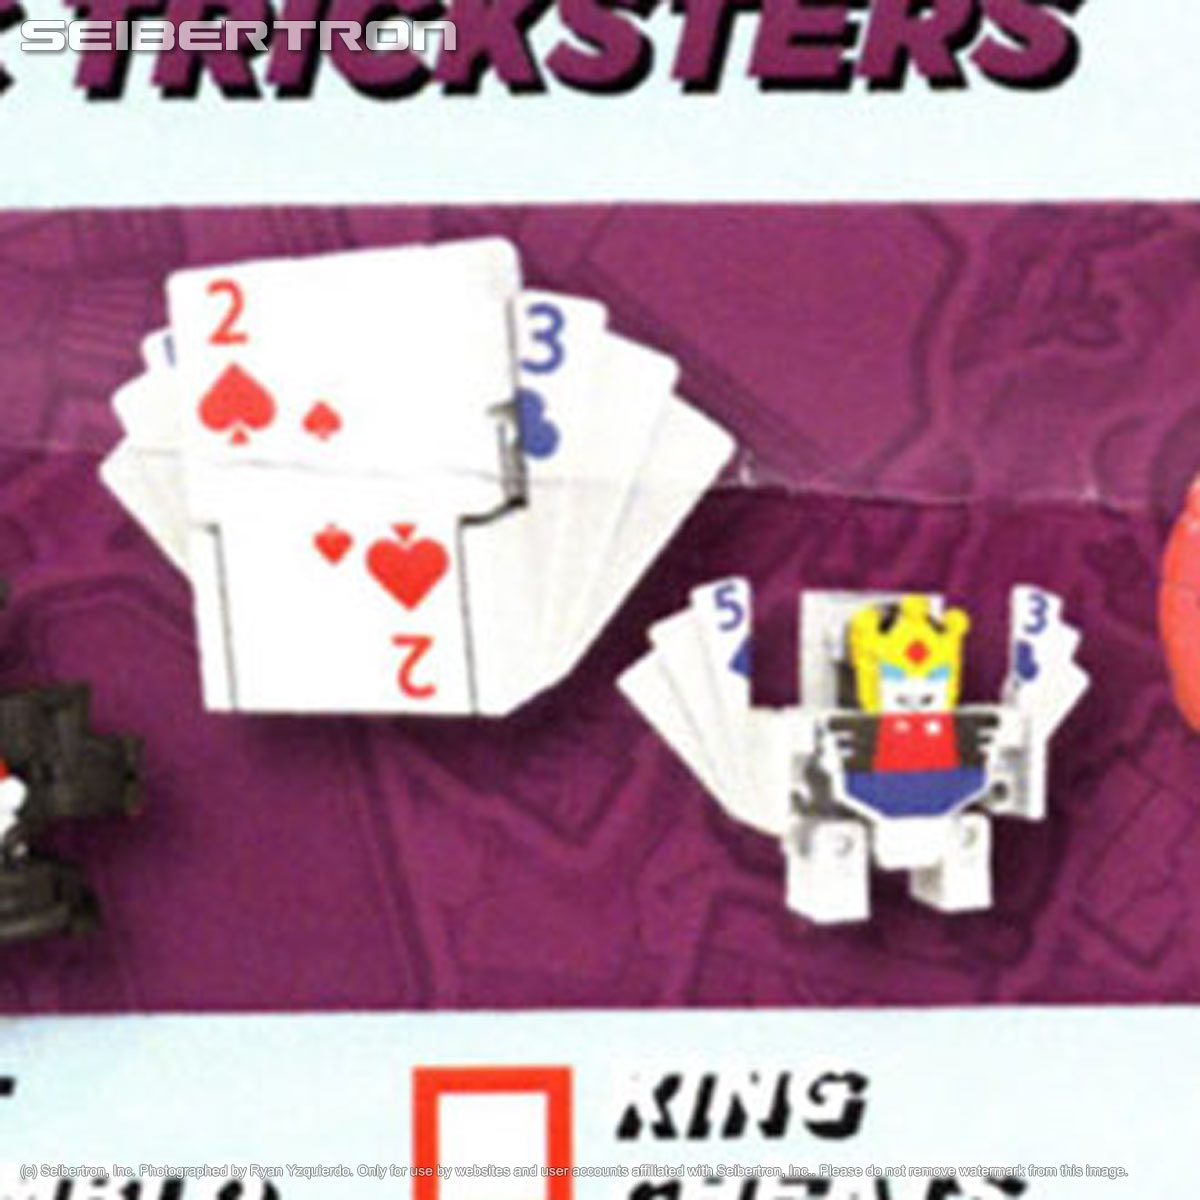 KING CHEATS Transformers BotBots Series 4 Magic Tricksters 2020 deck of cards